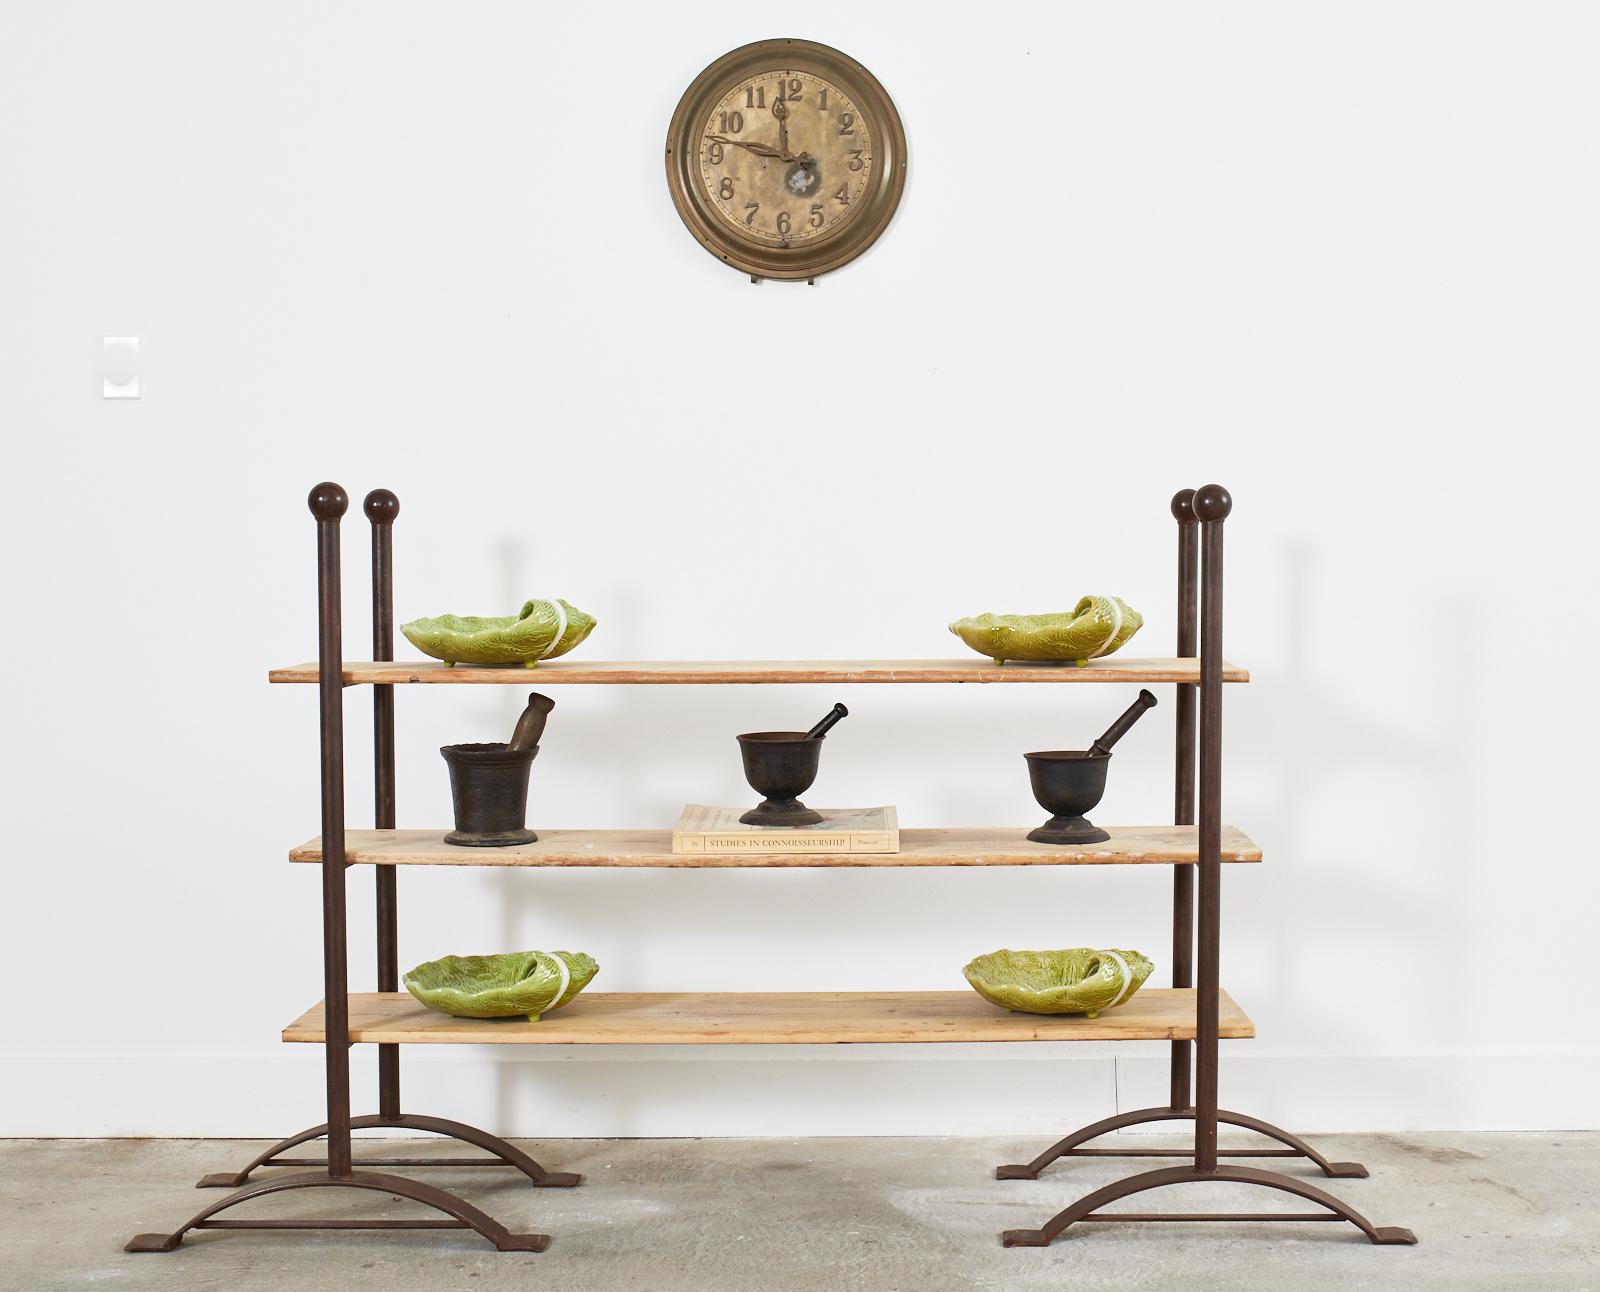 Artisan crafted pair iron and pine bakers racks, bookshelves, or display shelves. Beautifully crafted with an intentionally patinated finish on the iron and a bleached, aged finish on the pine planks. The thick iron columns feature large ball